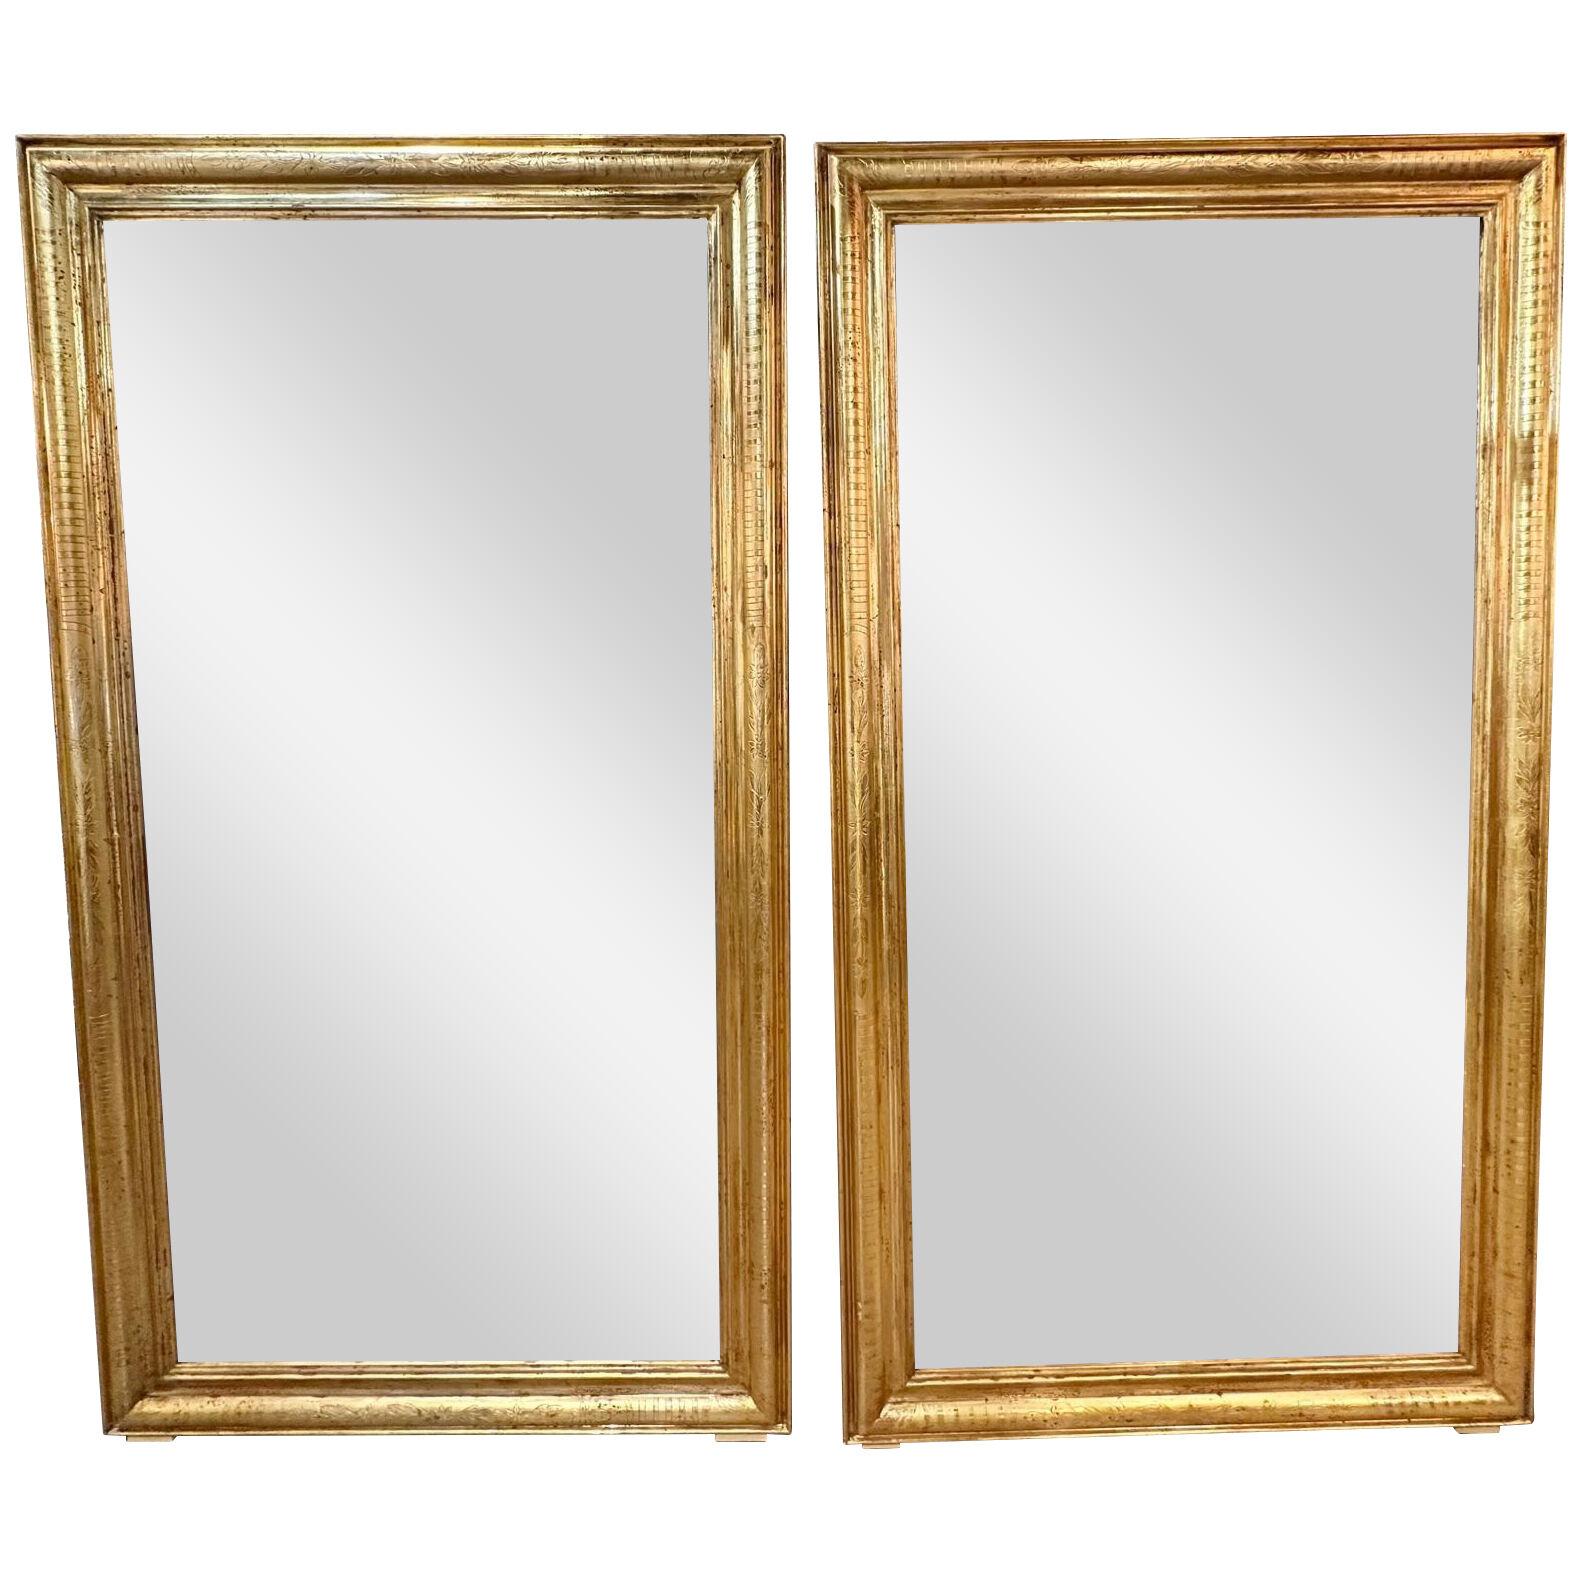 Pair of French Directoire' Giltwood Mirrors